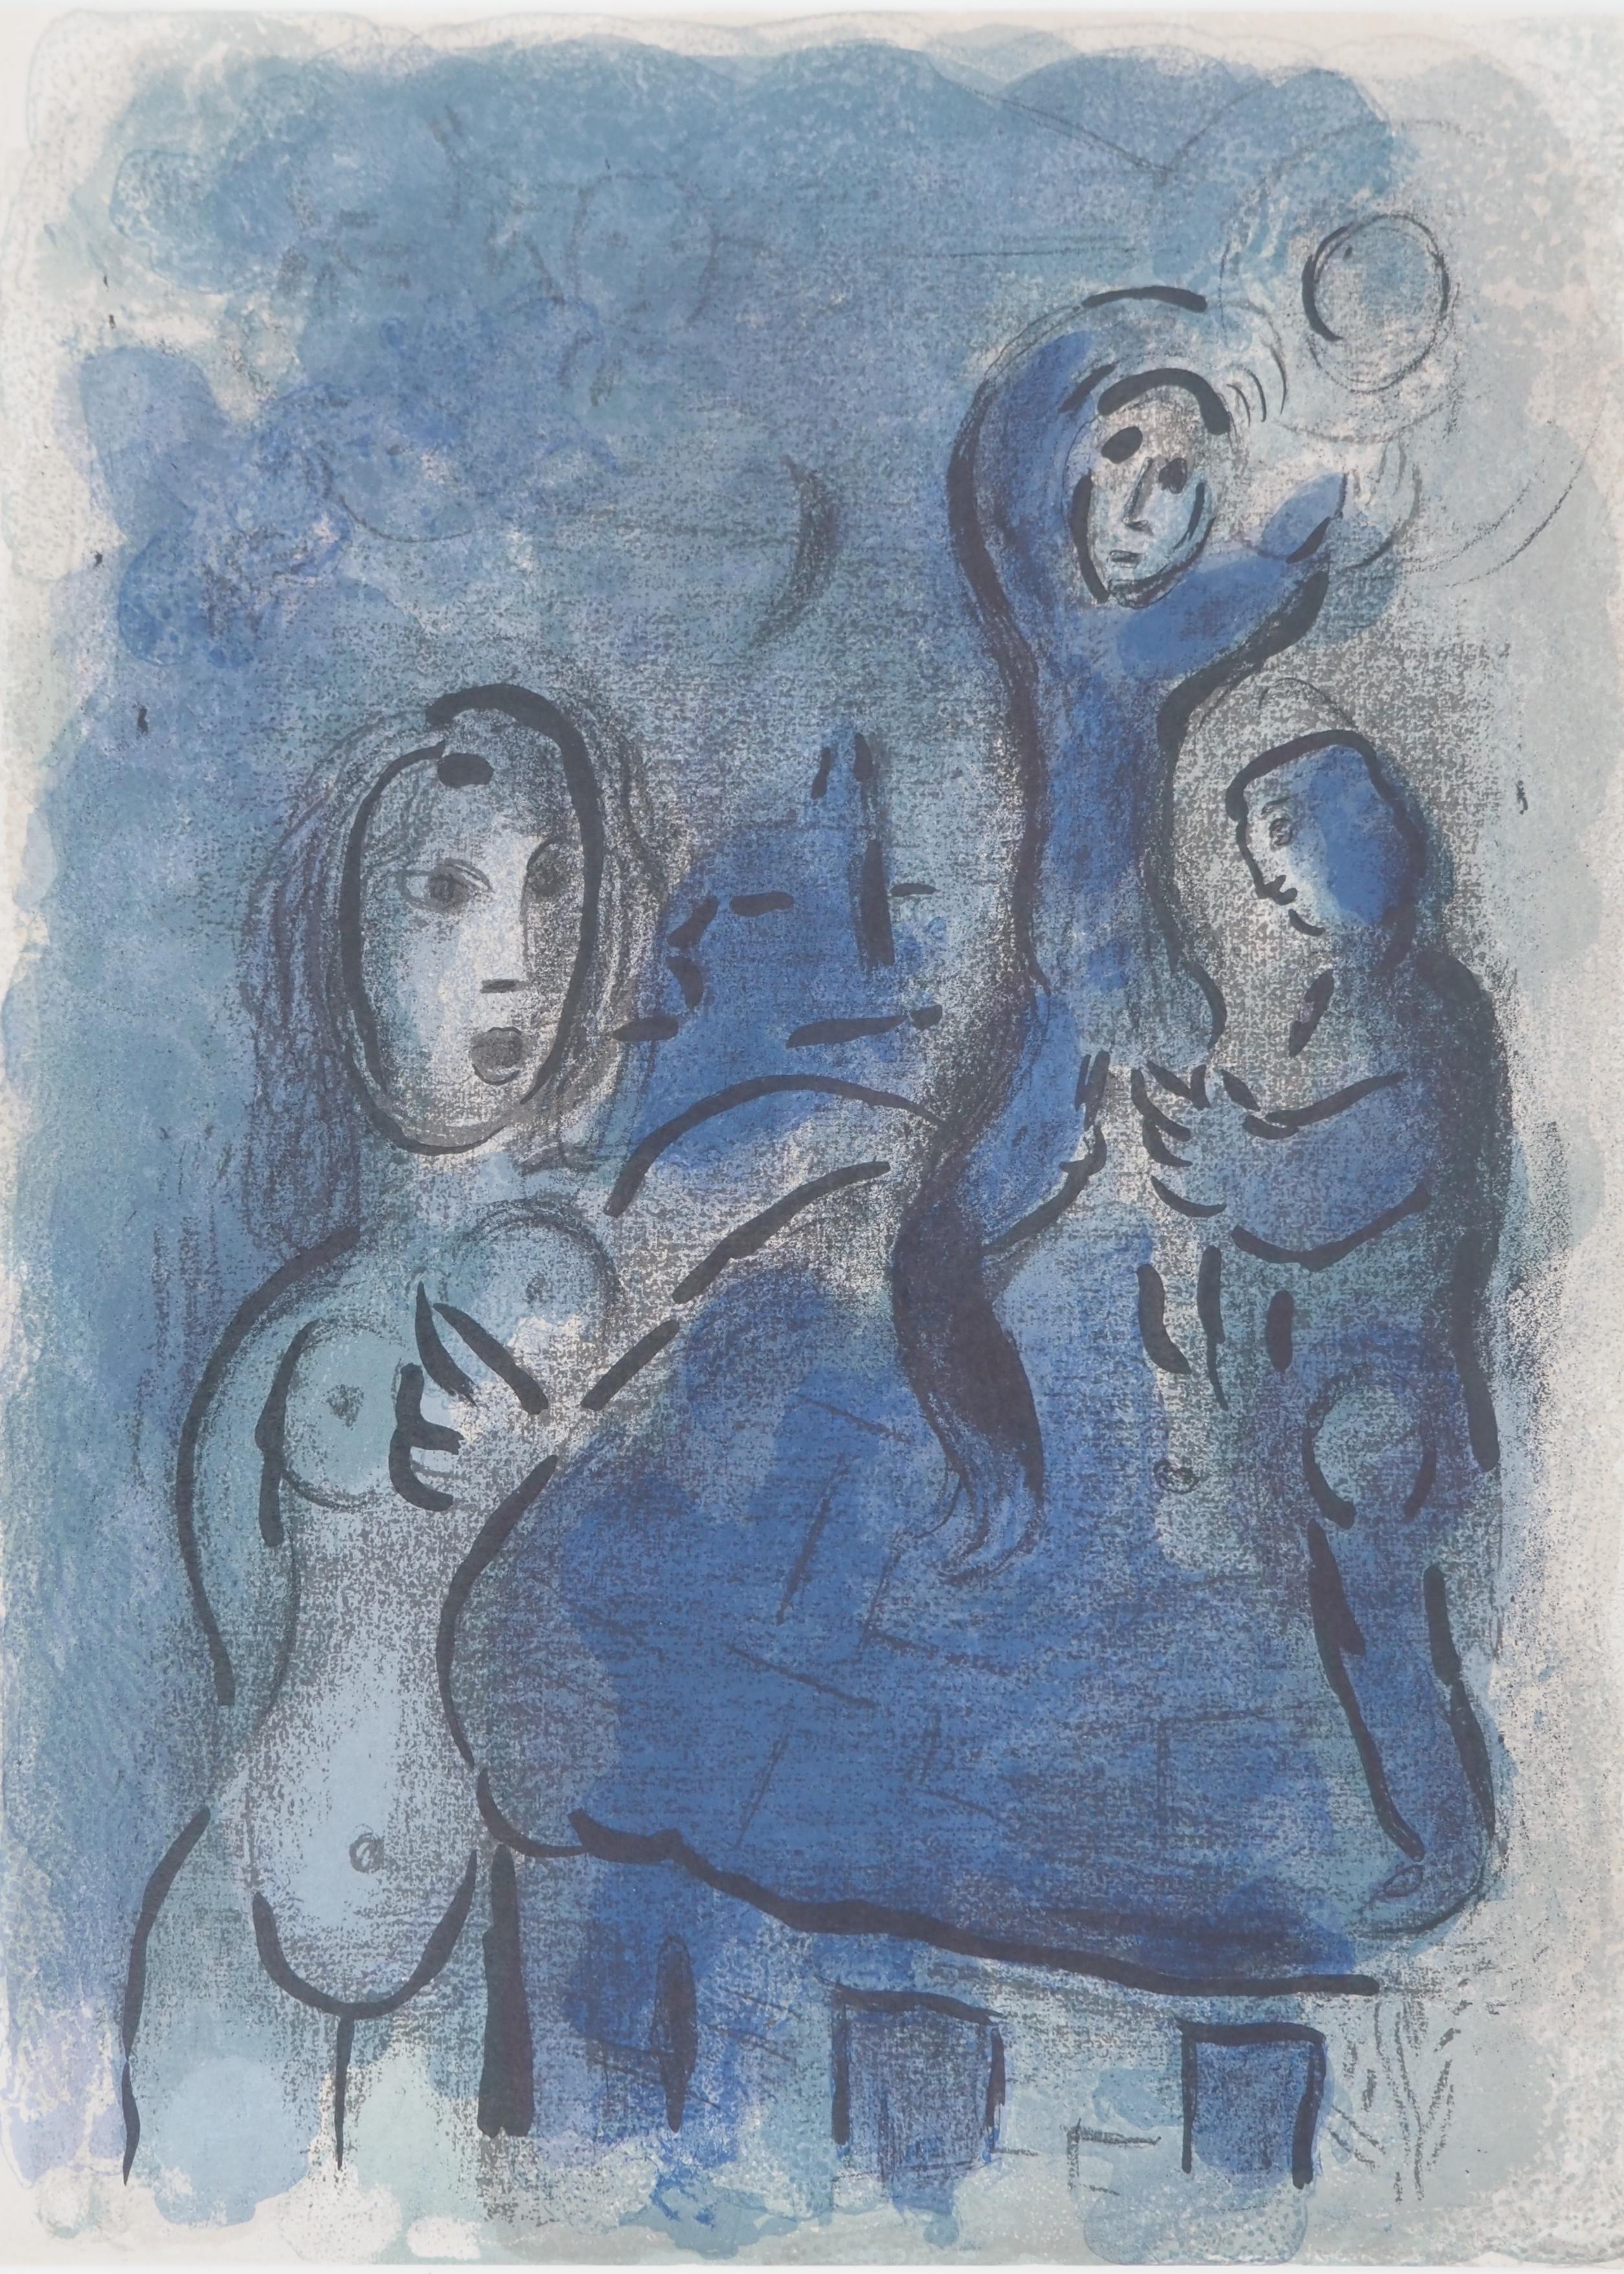 Did Marc Chagall migrate to the United States?